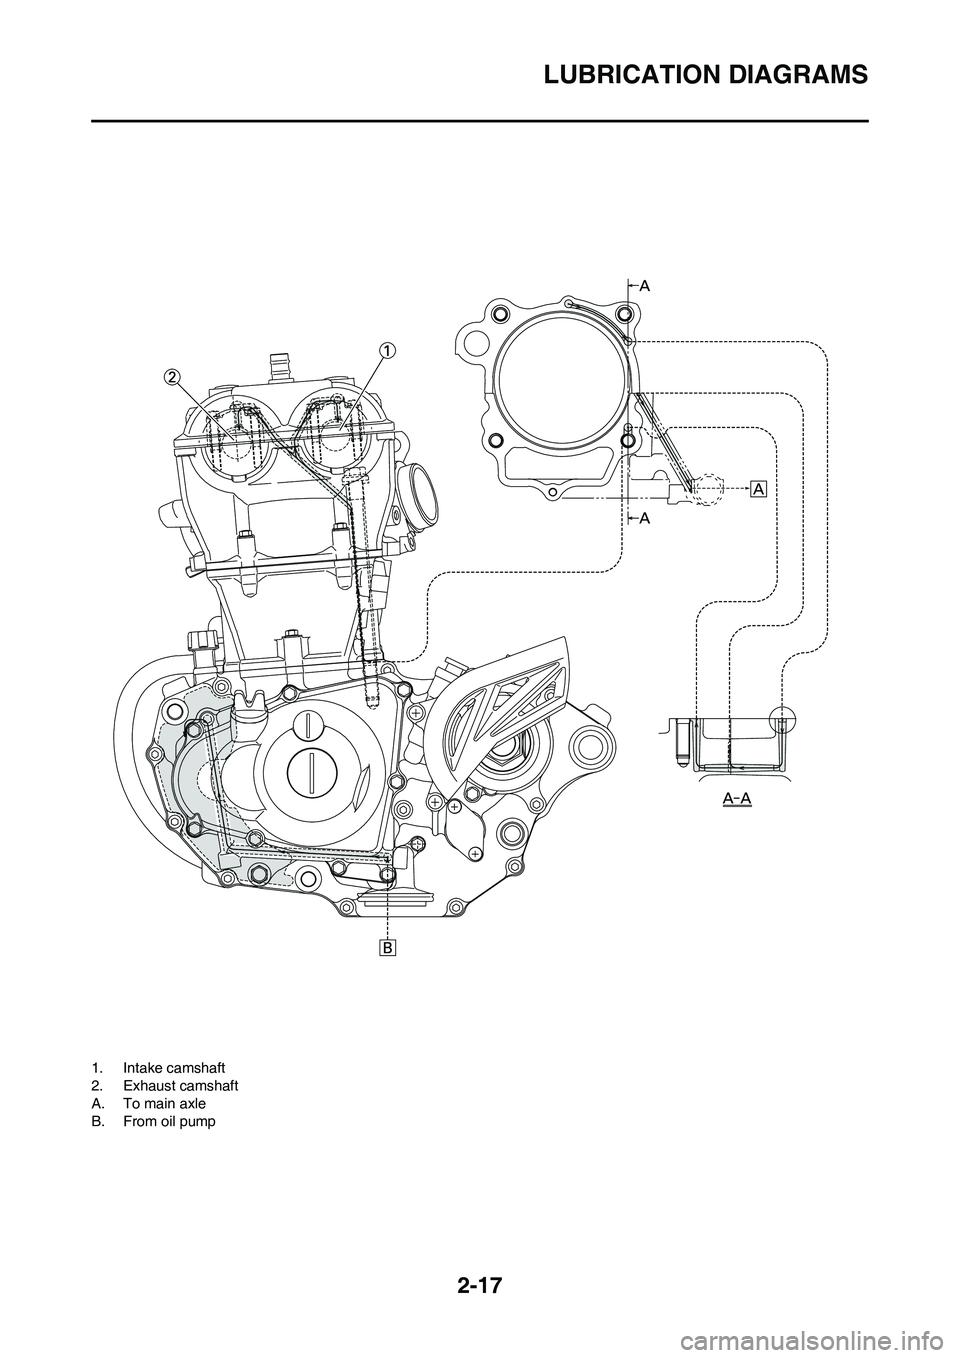 YAMAHA YZ450F 2009 Owners Guide 2-17
LUBRICATION DIAGRAMS
1. Intake camshaft
2. Exhaust camshaft
A. To main axle
B. From oil pump 